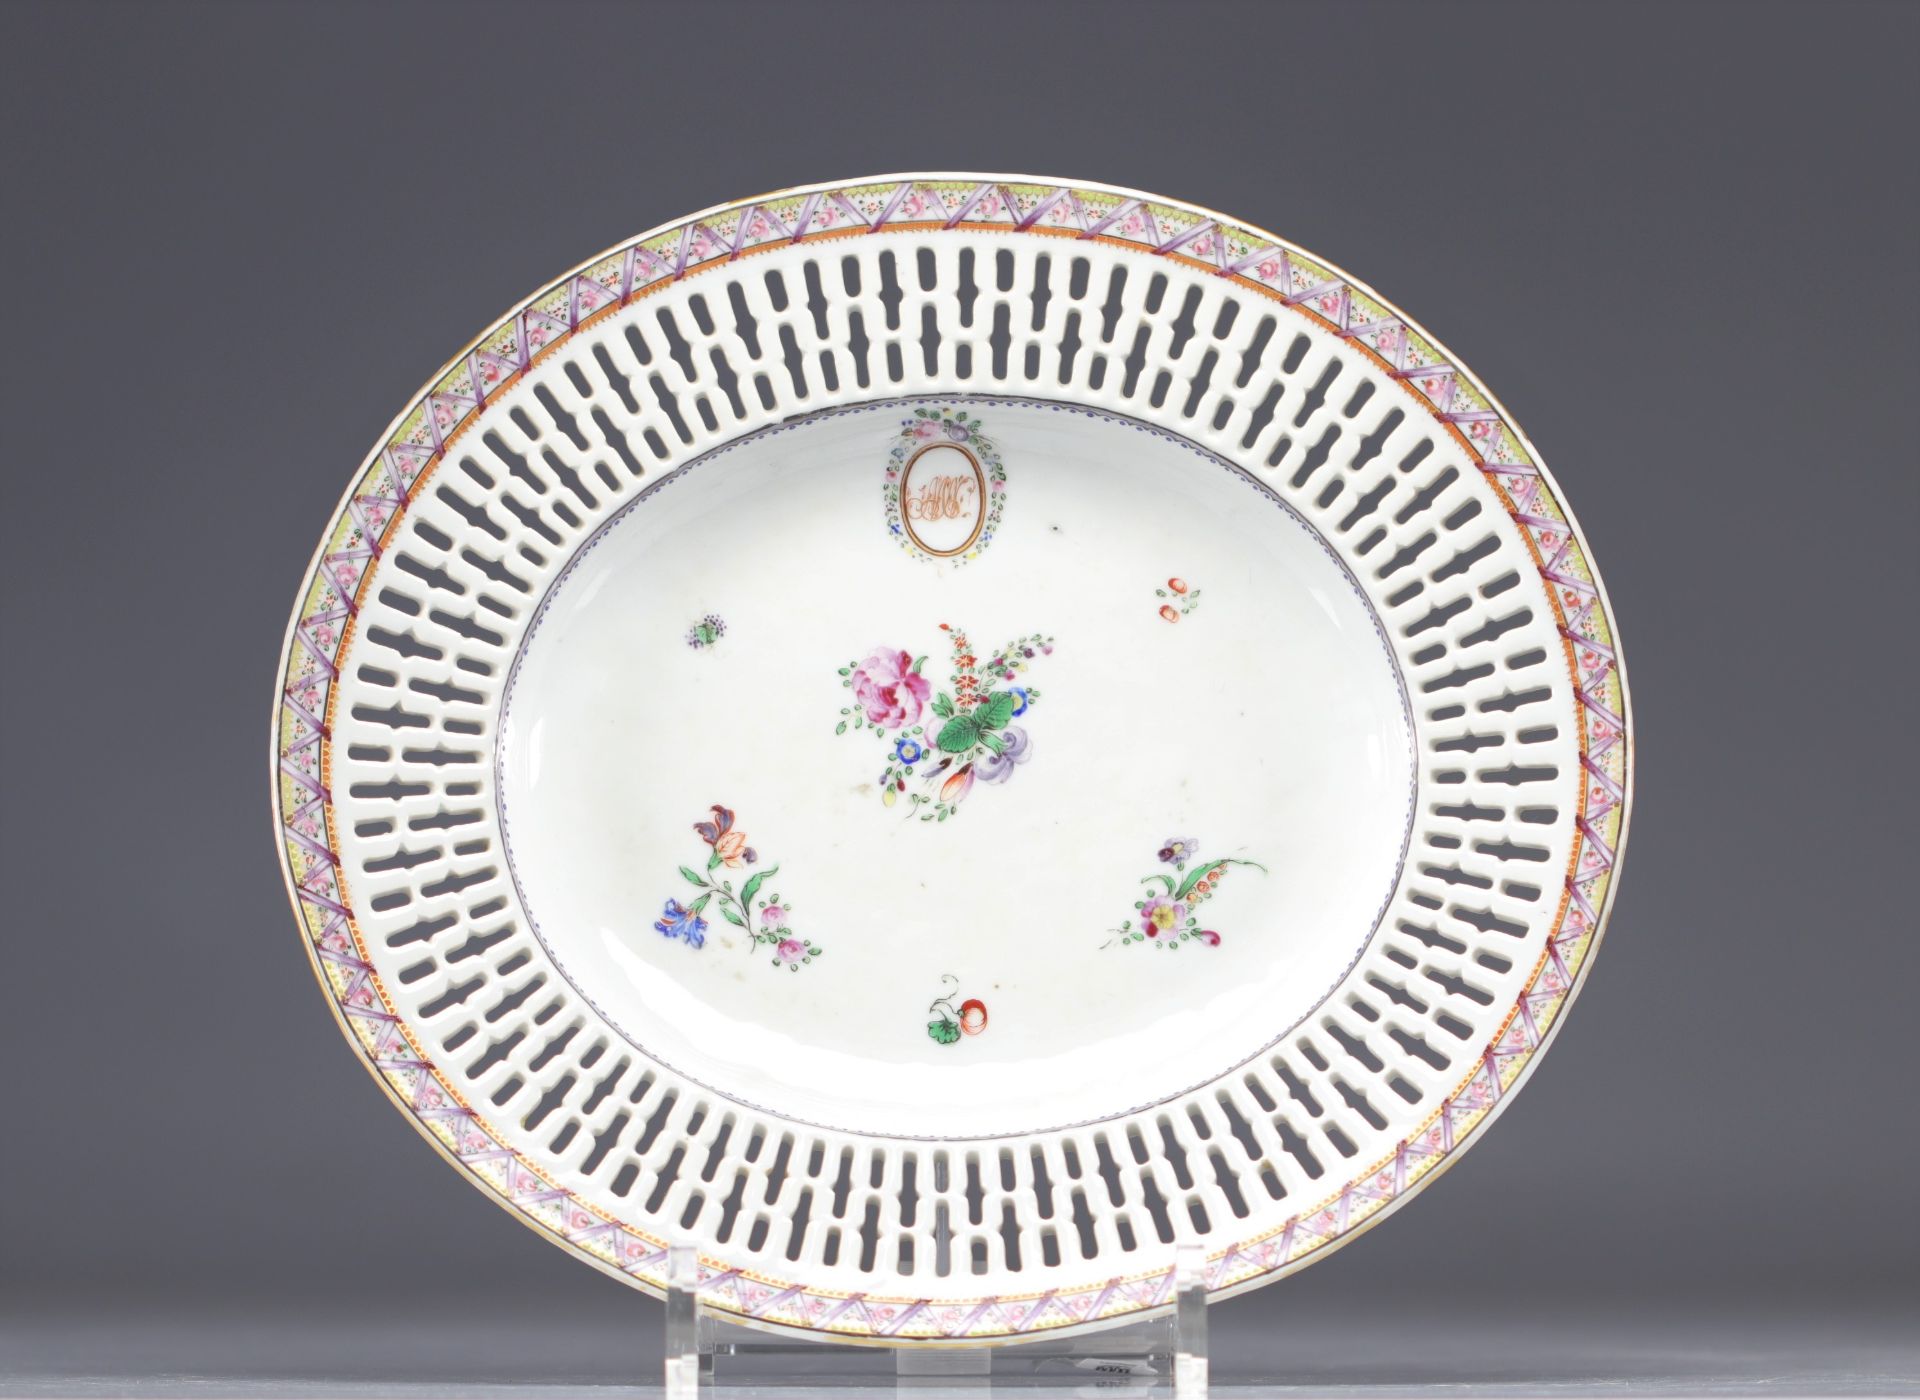 Compagnie des Indes openwork porcelain dish Famille Rose from 18th century